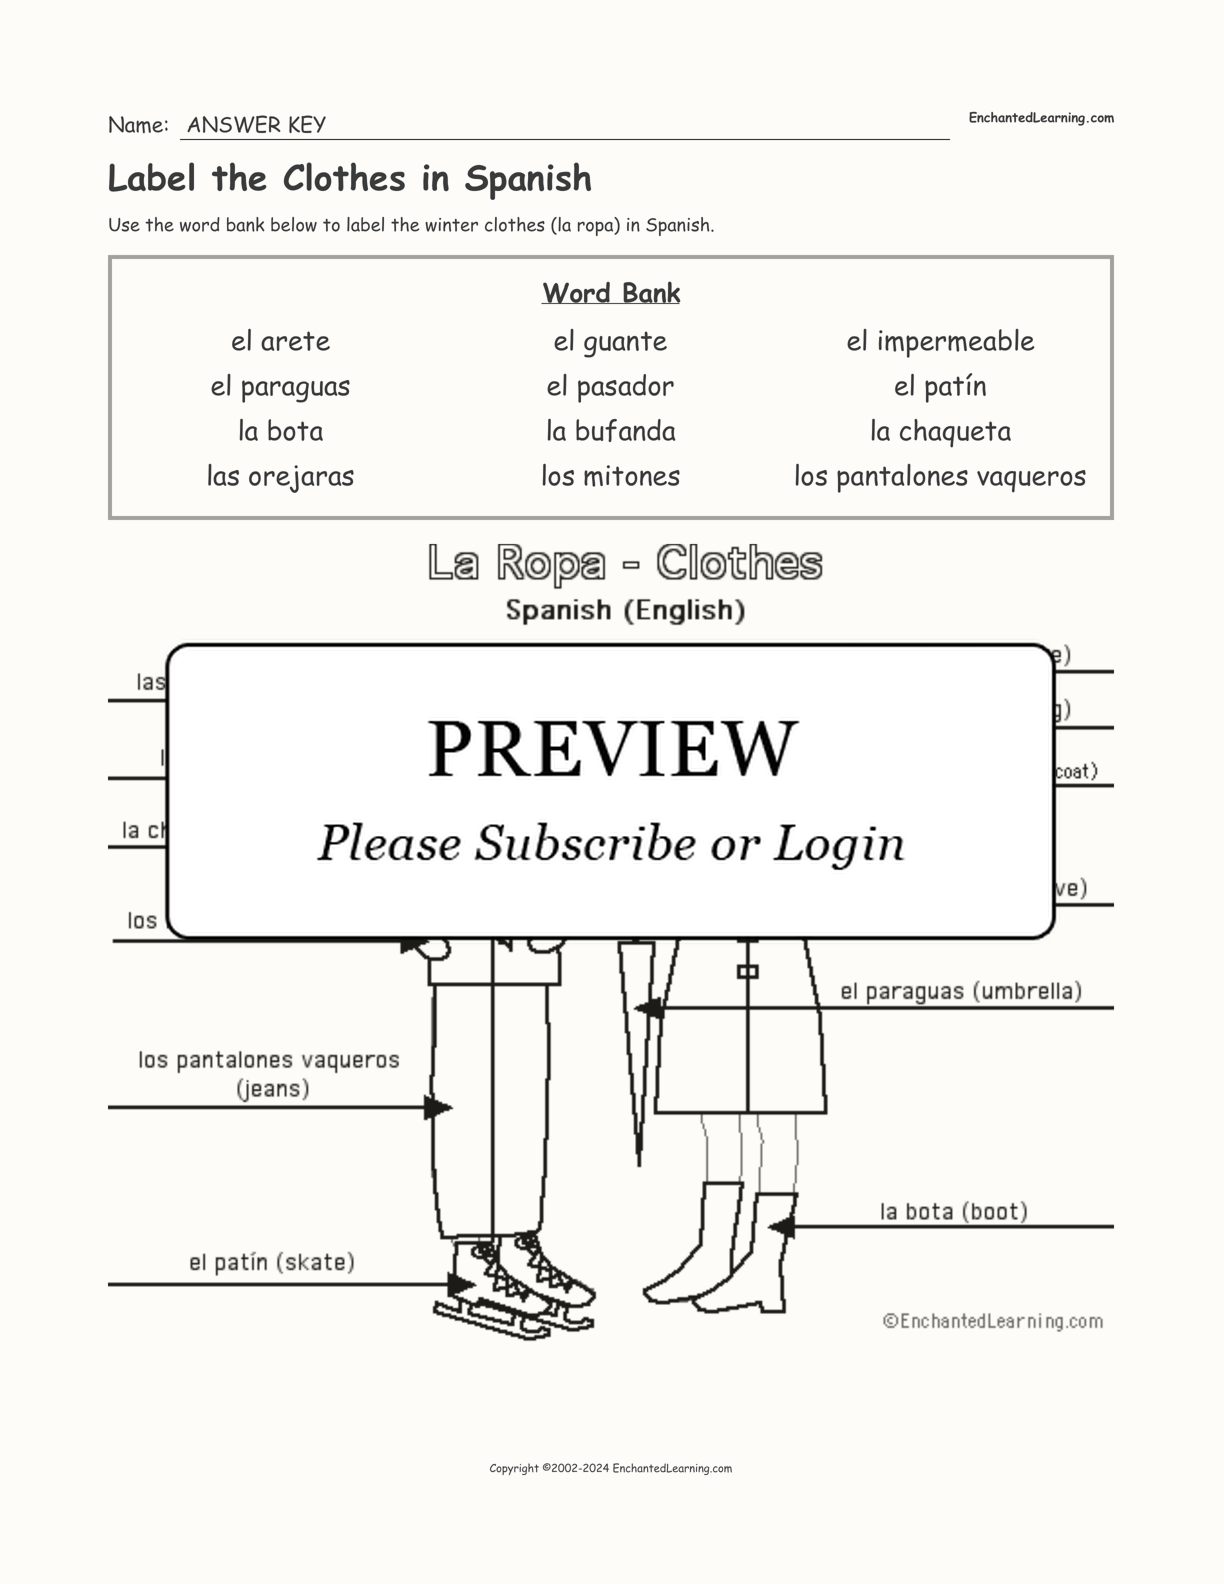 Label the Clothes in Spanish interactive worksheet page 2